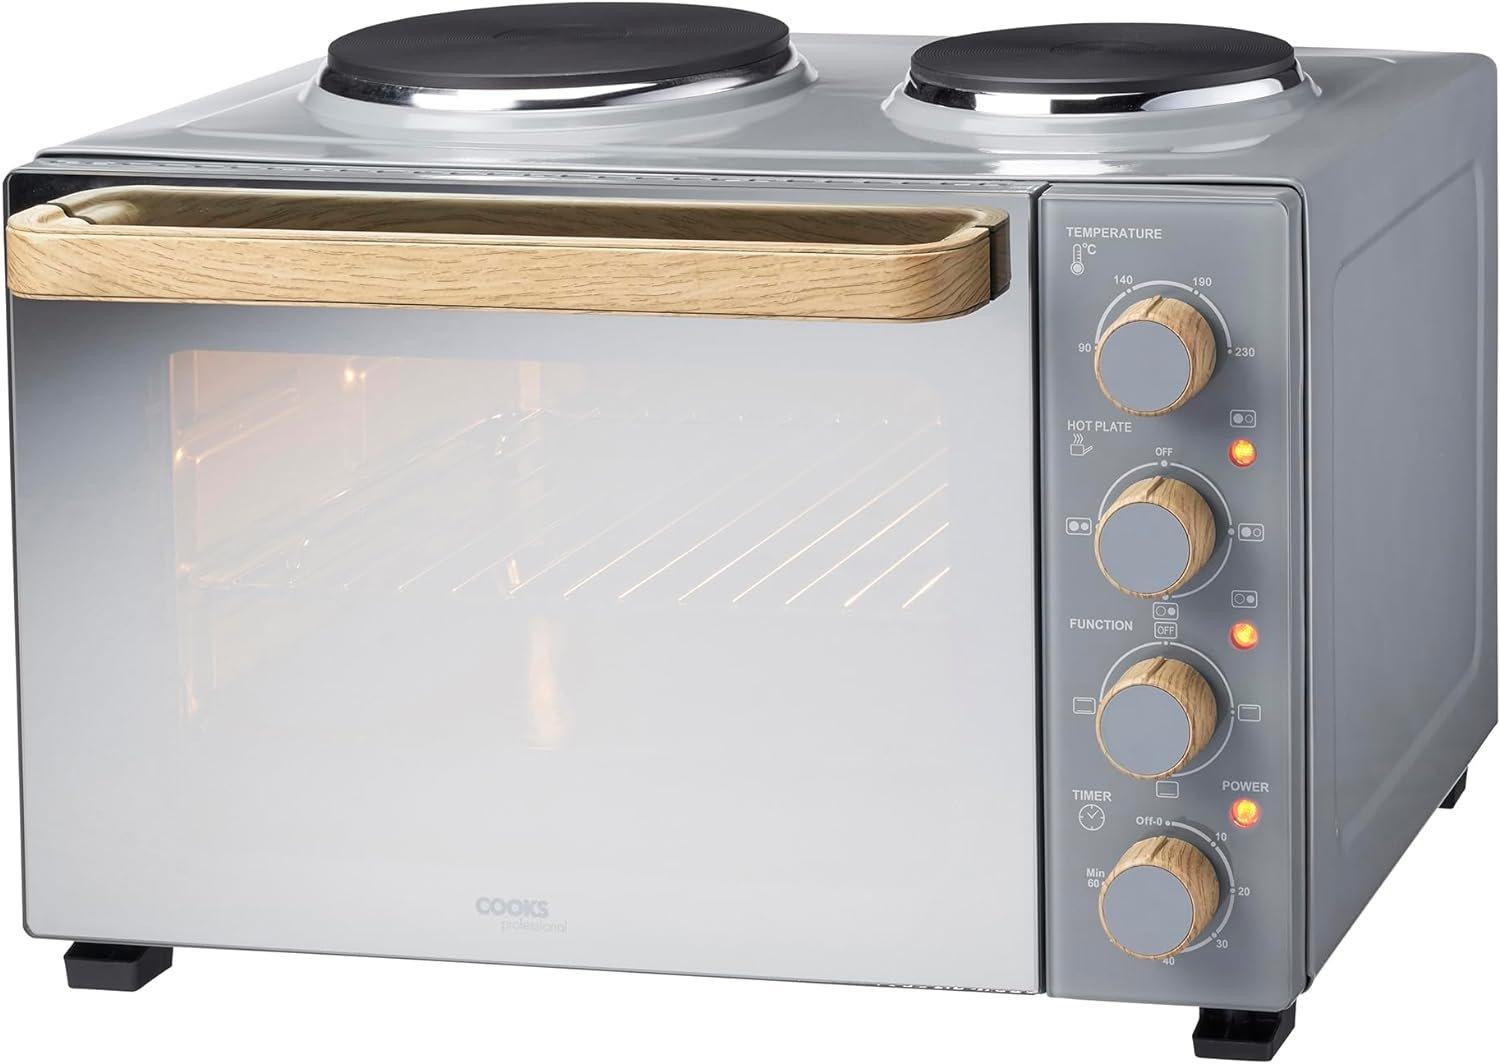 Mini Oven with Hobs Energy Efficient Electric Countertop Cooker with Two Hobs & Wire Rack Baking Tra